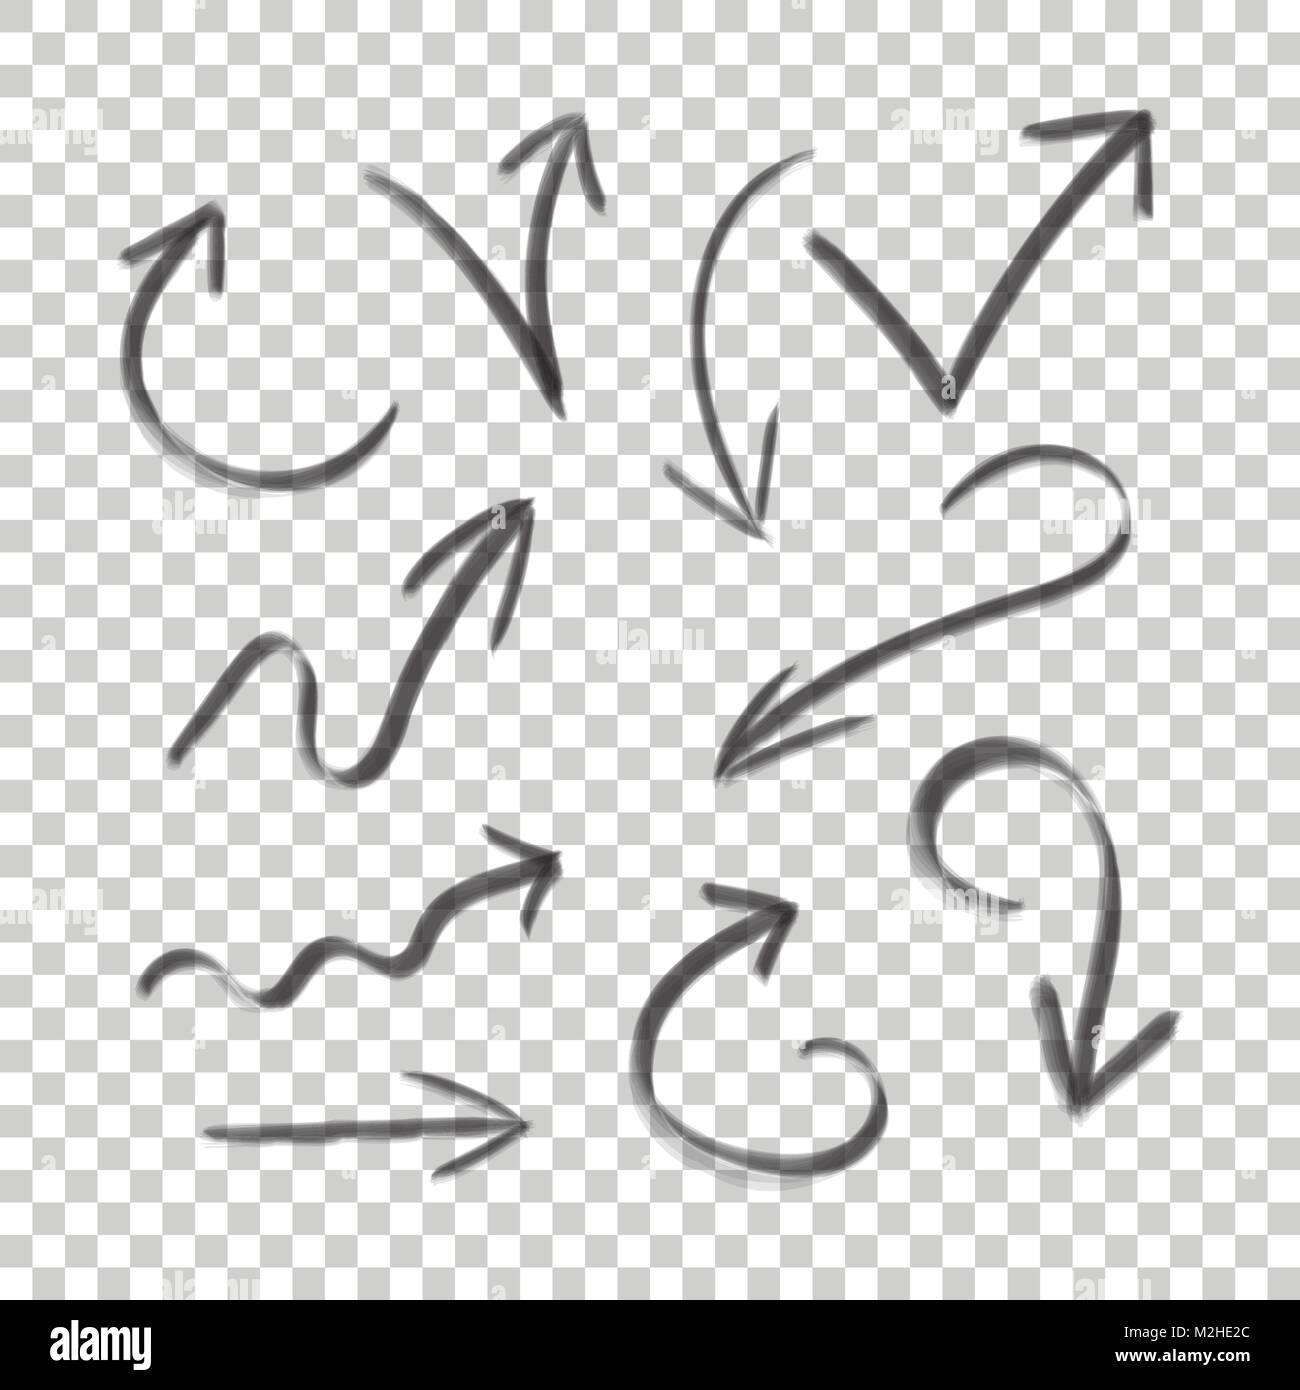 Hand drawn arrow set icon. Collection of pencil sketch symbols. Vector illustration on isolated background. Stock Vector